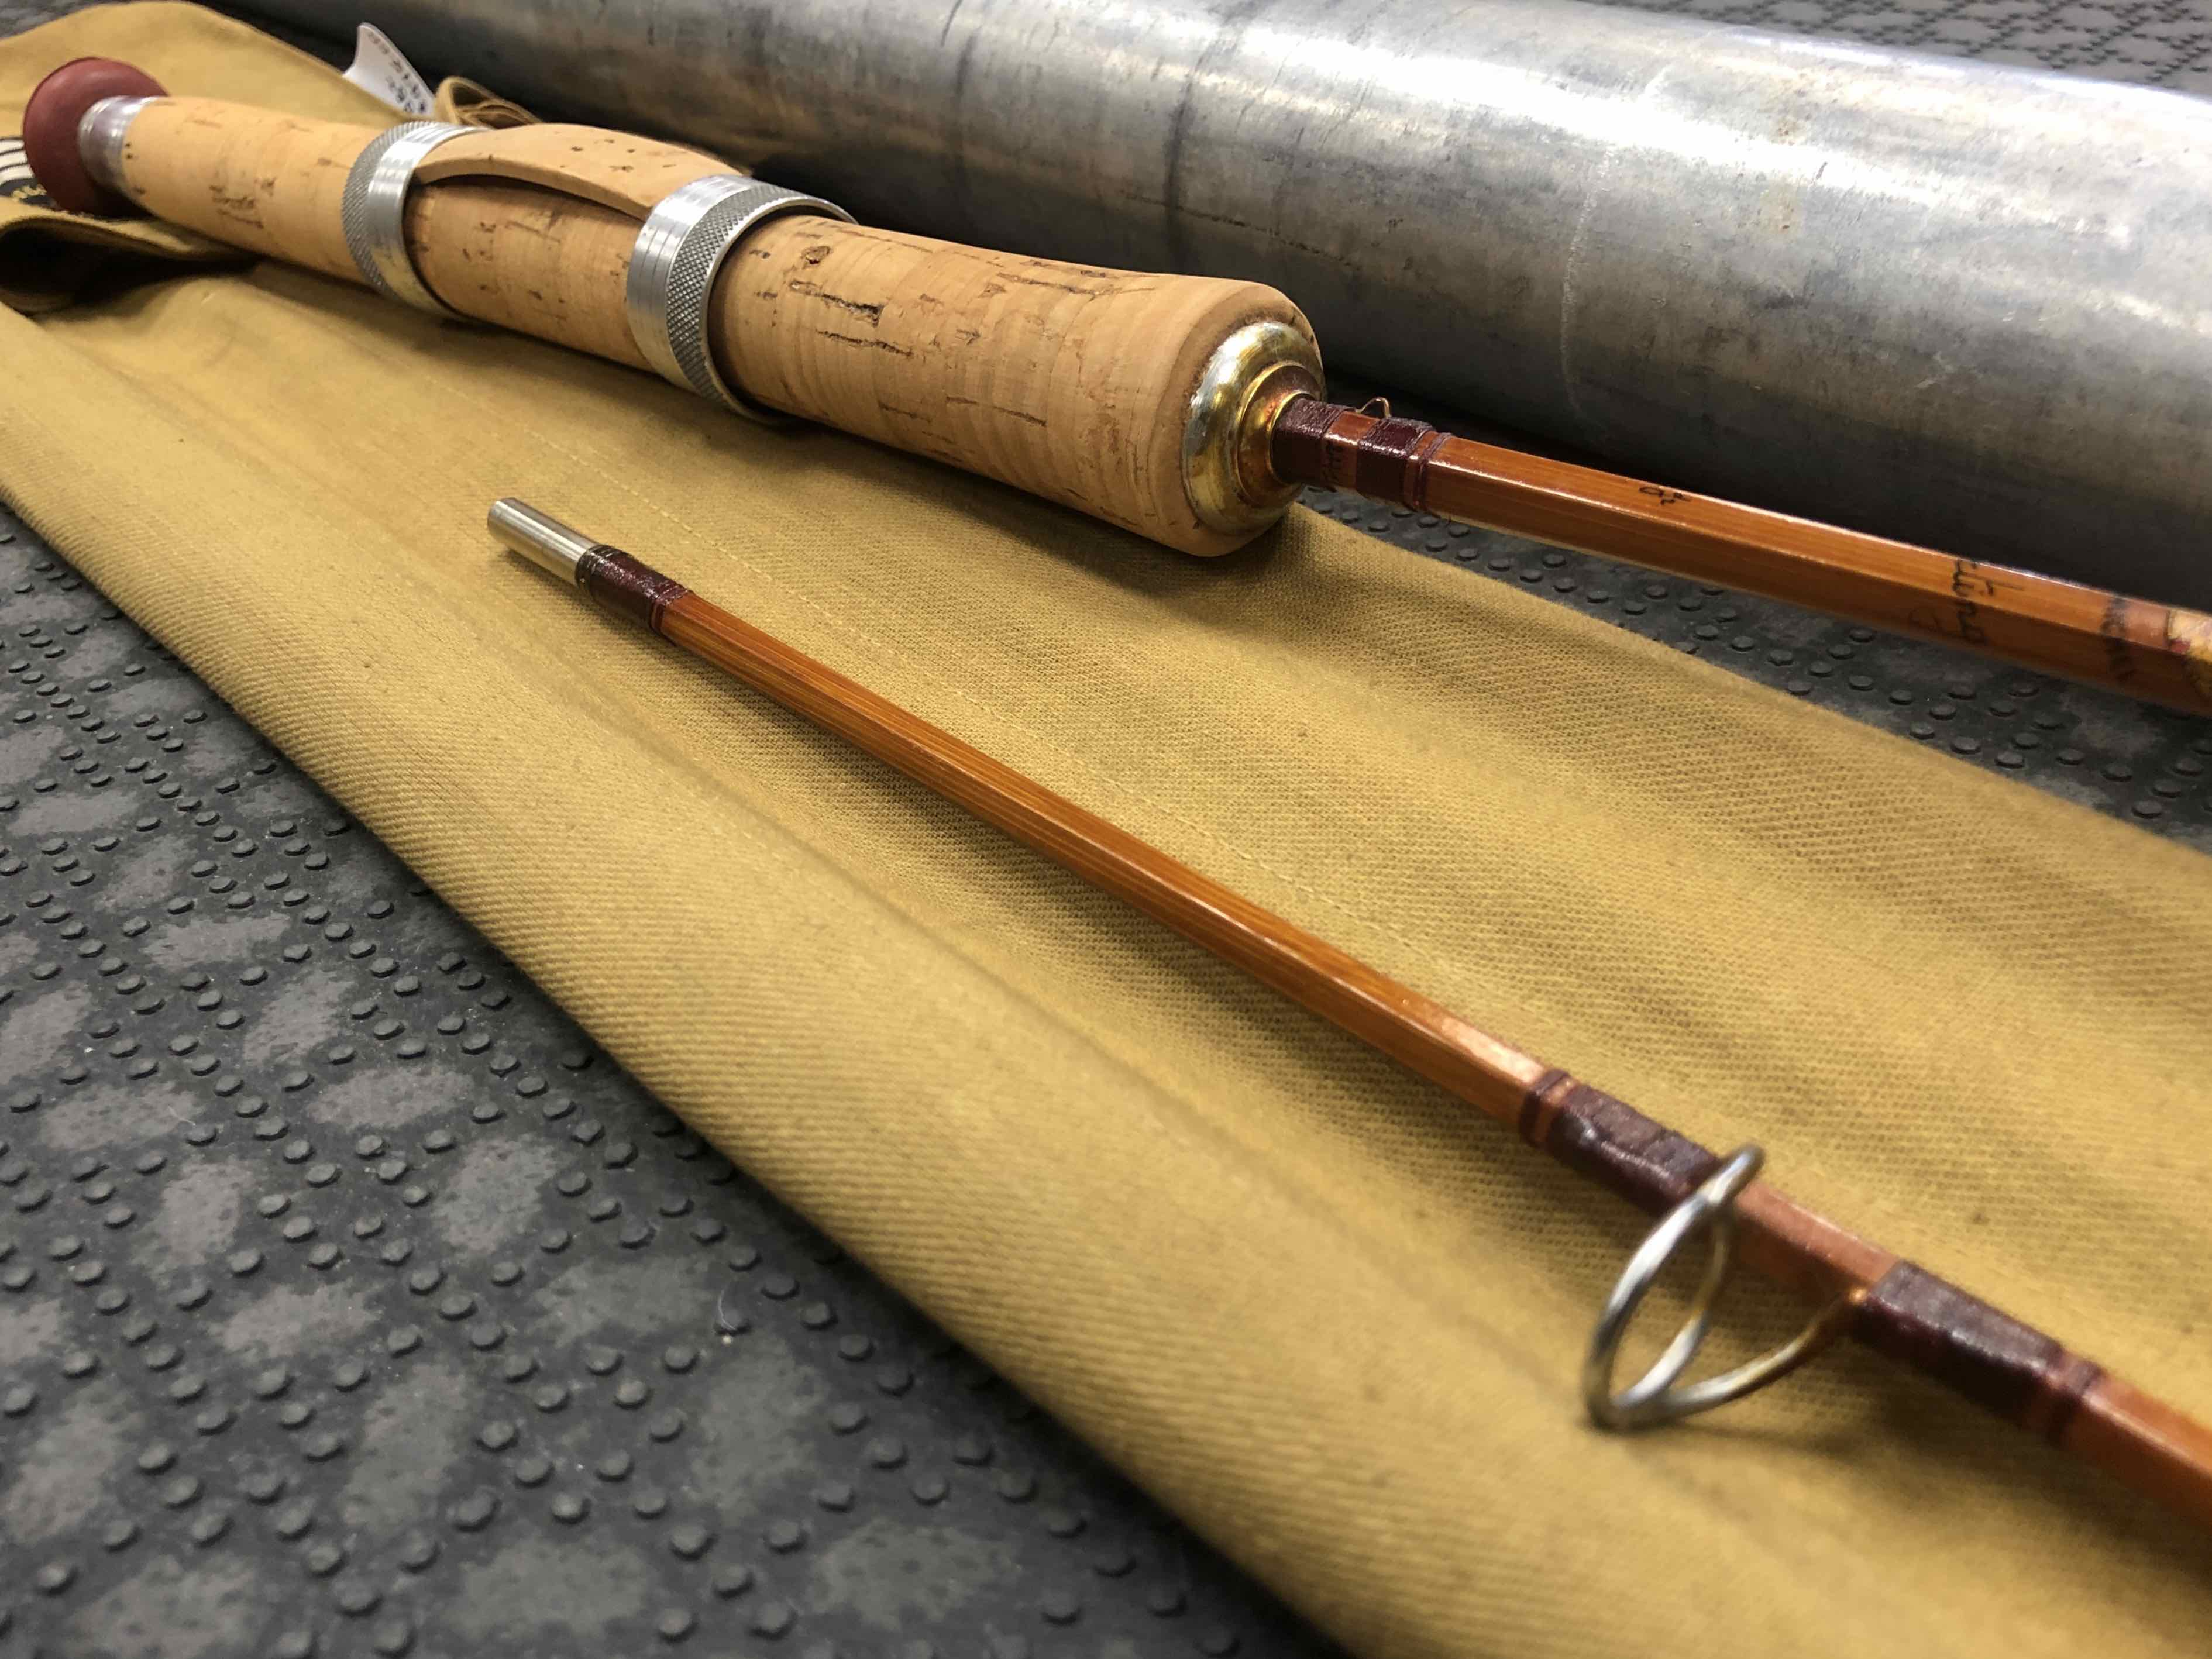 Collectors Edition - Pezon and Michel - 2Pc - 6’ - Bamboo Spinning Rod - From 1952 - Made in France - "Sporting Model BB2” - Removed from Sock twice - FANTASTIC CONDITION! - $475